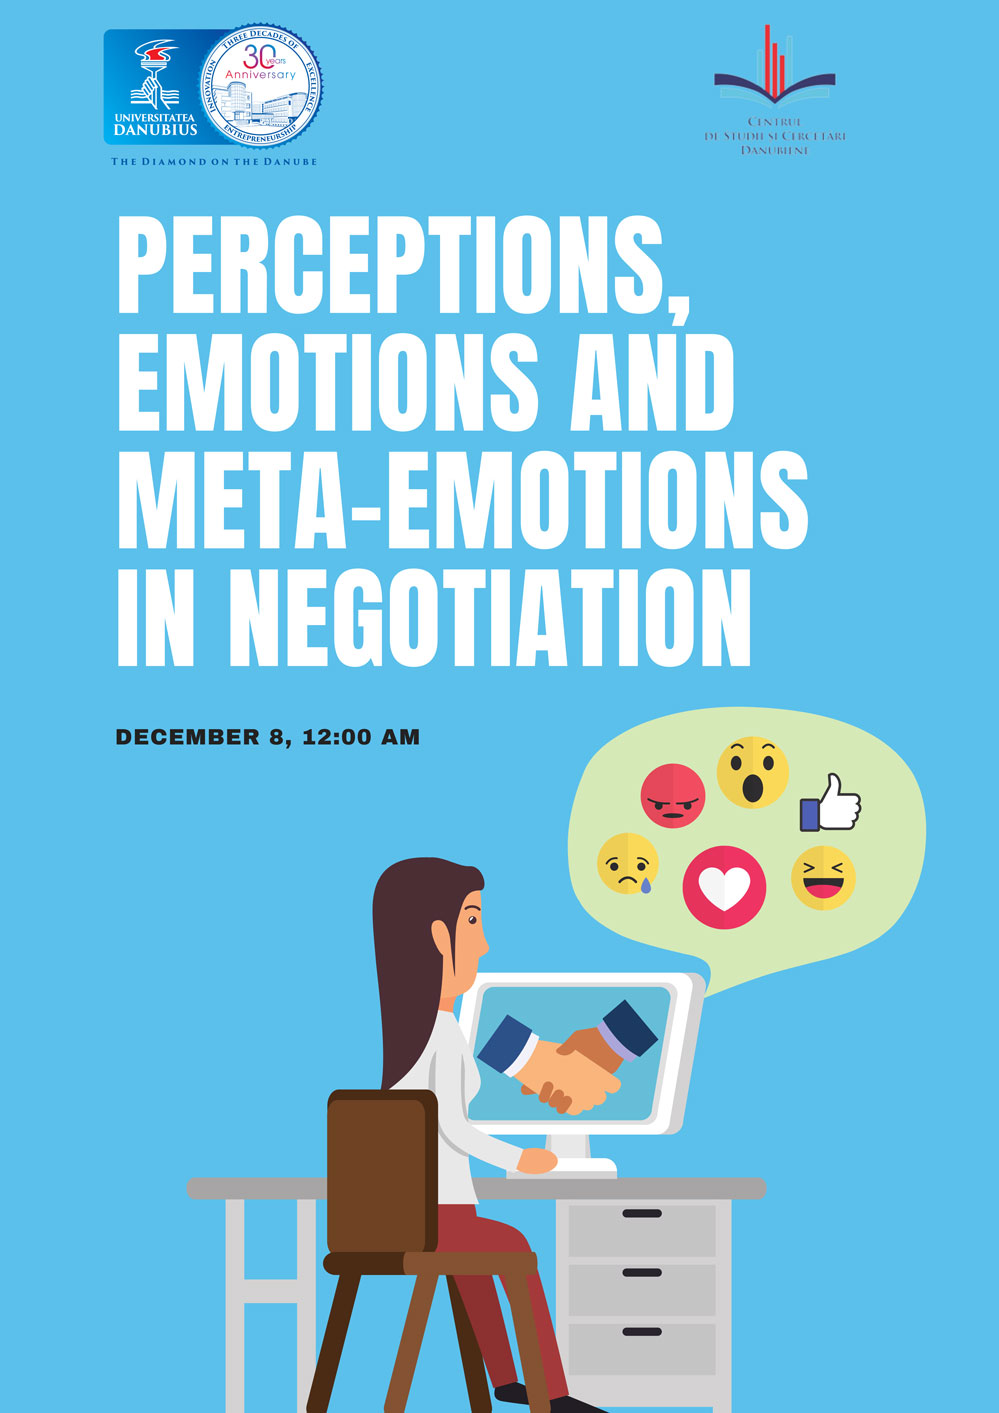 WORKSHOP - PERCEPTIONS, EMOTIONS AND META-EMOTIONS IN NEGOTIATION